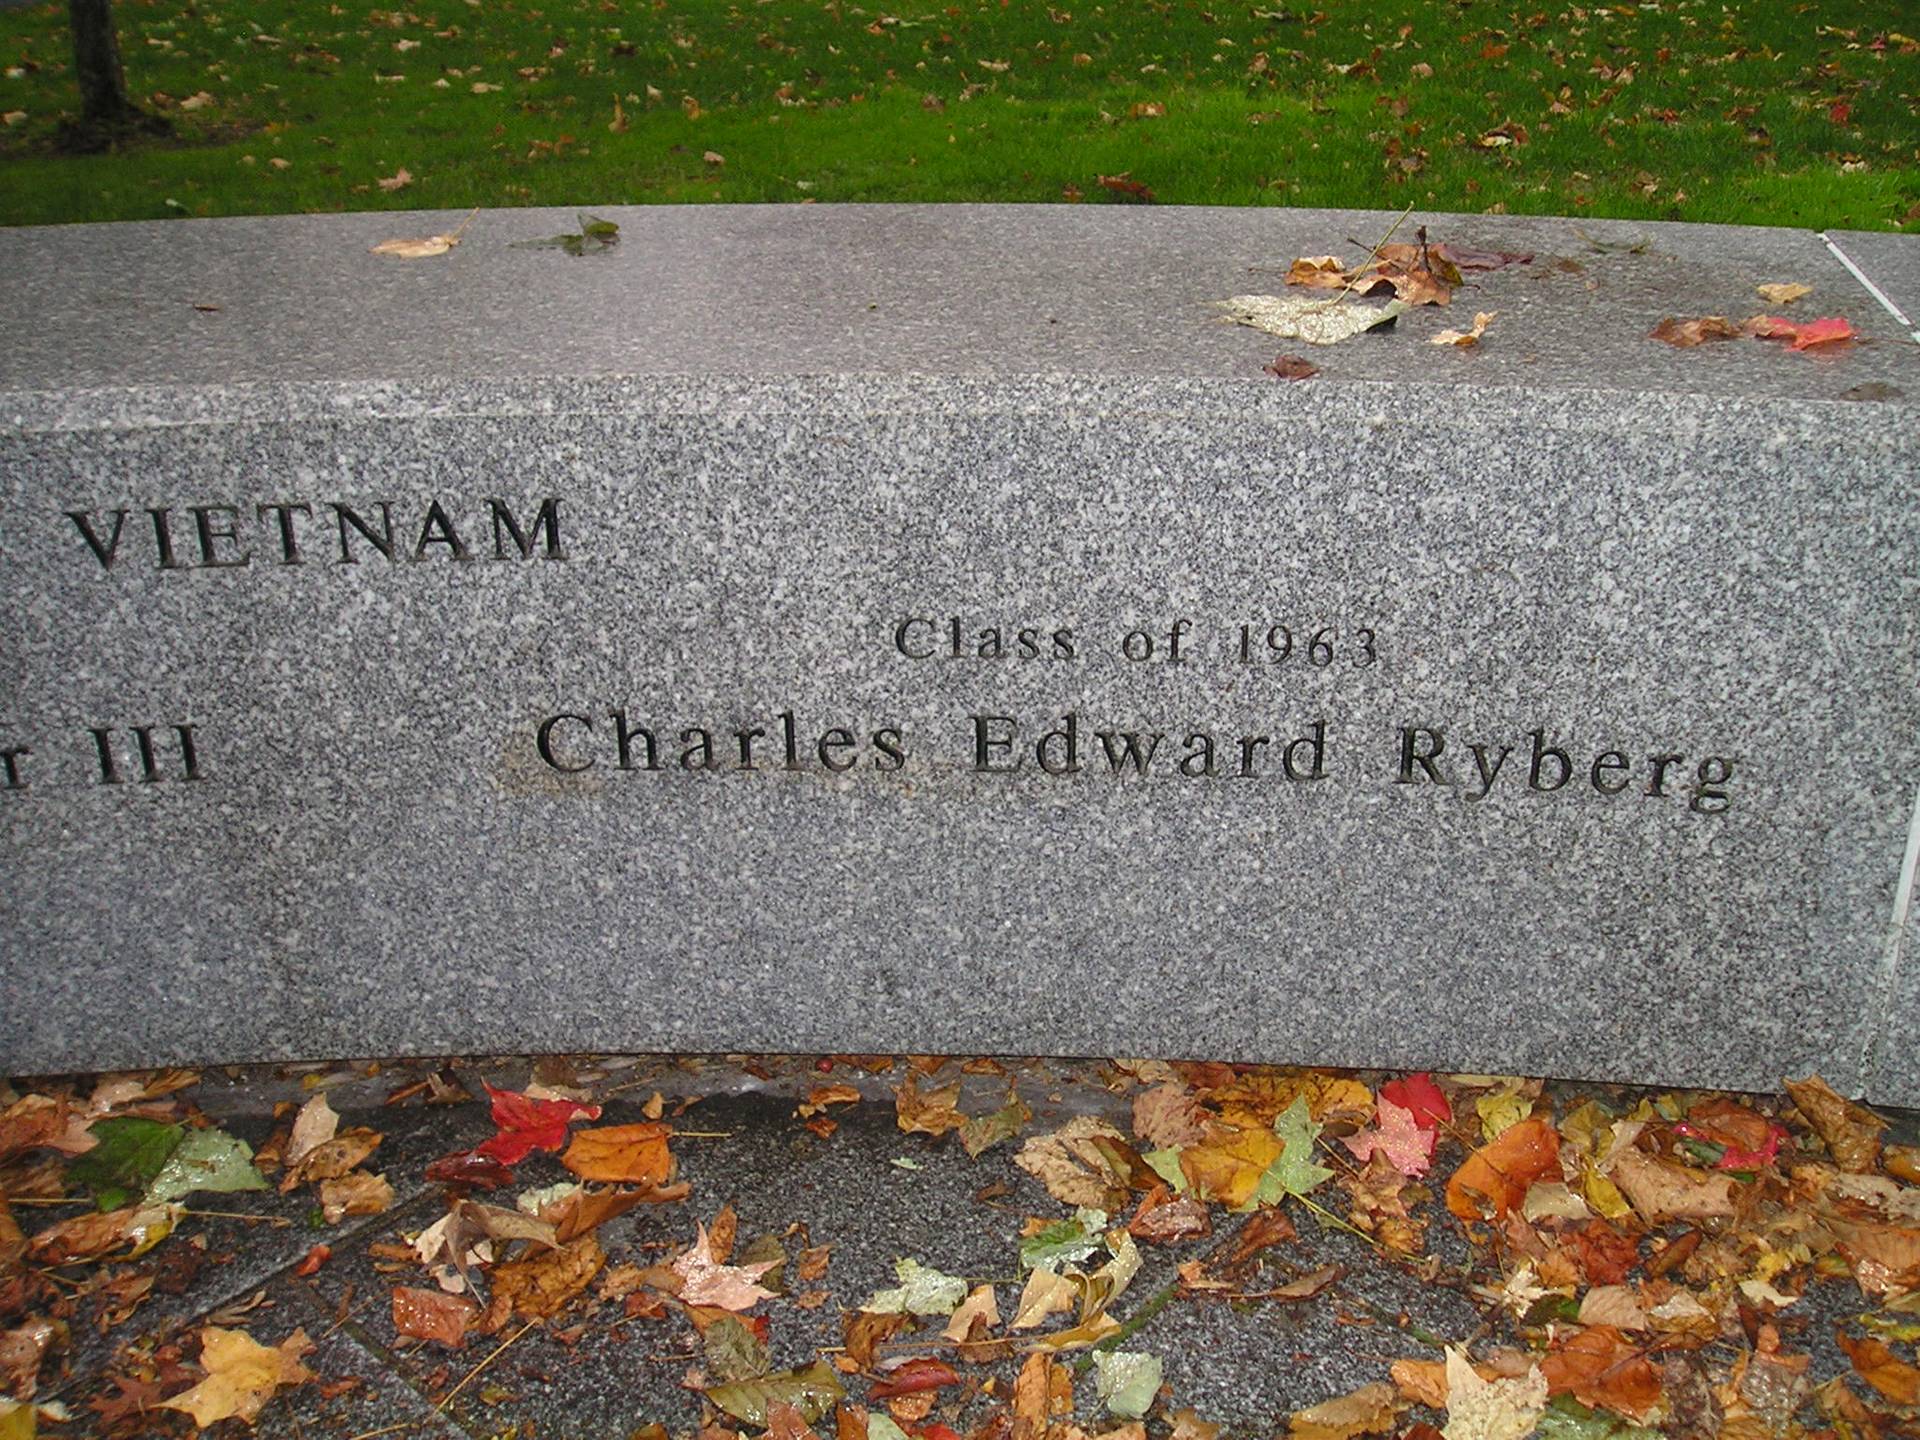 A granite memorial in the fall. Text reads: Class of 1963, Charles Edward Ryberg.